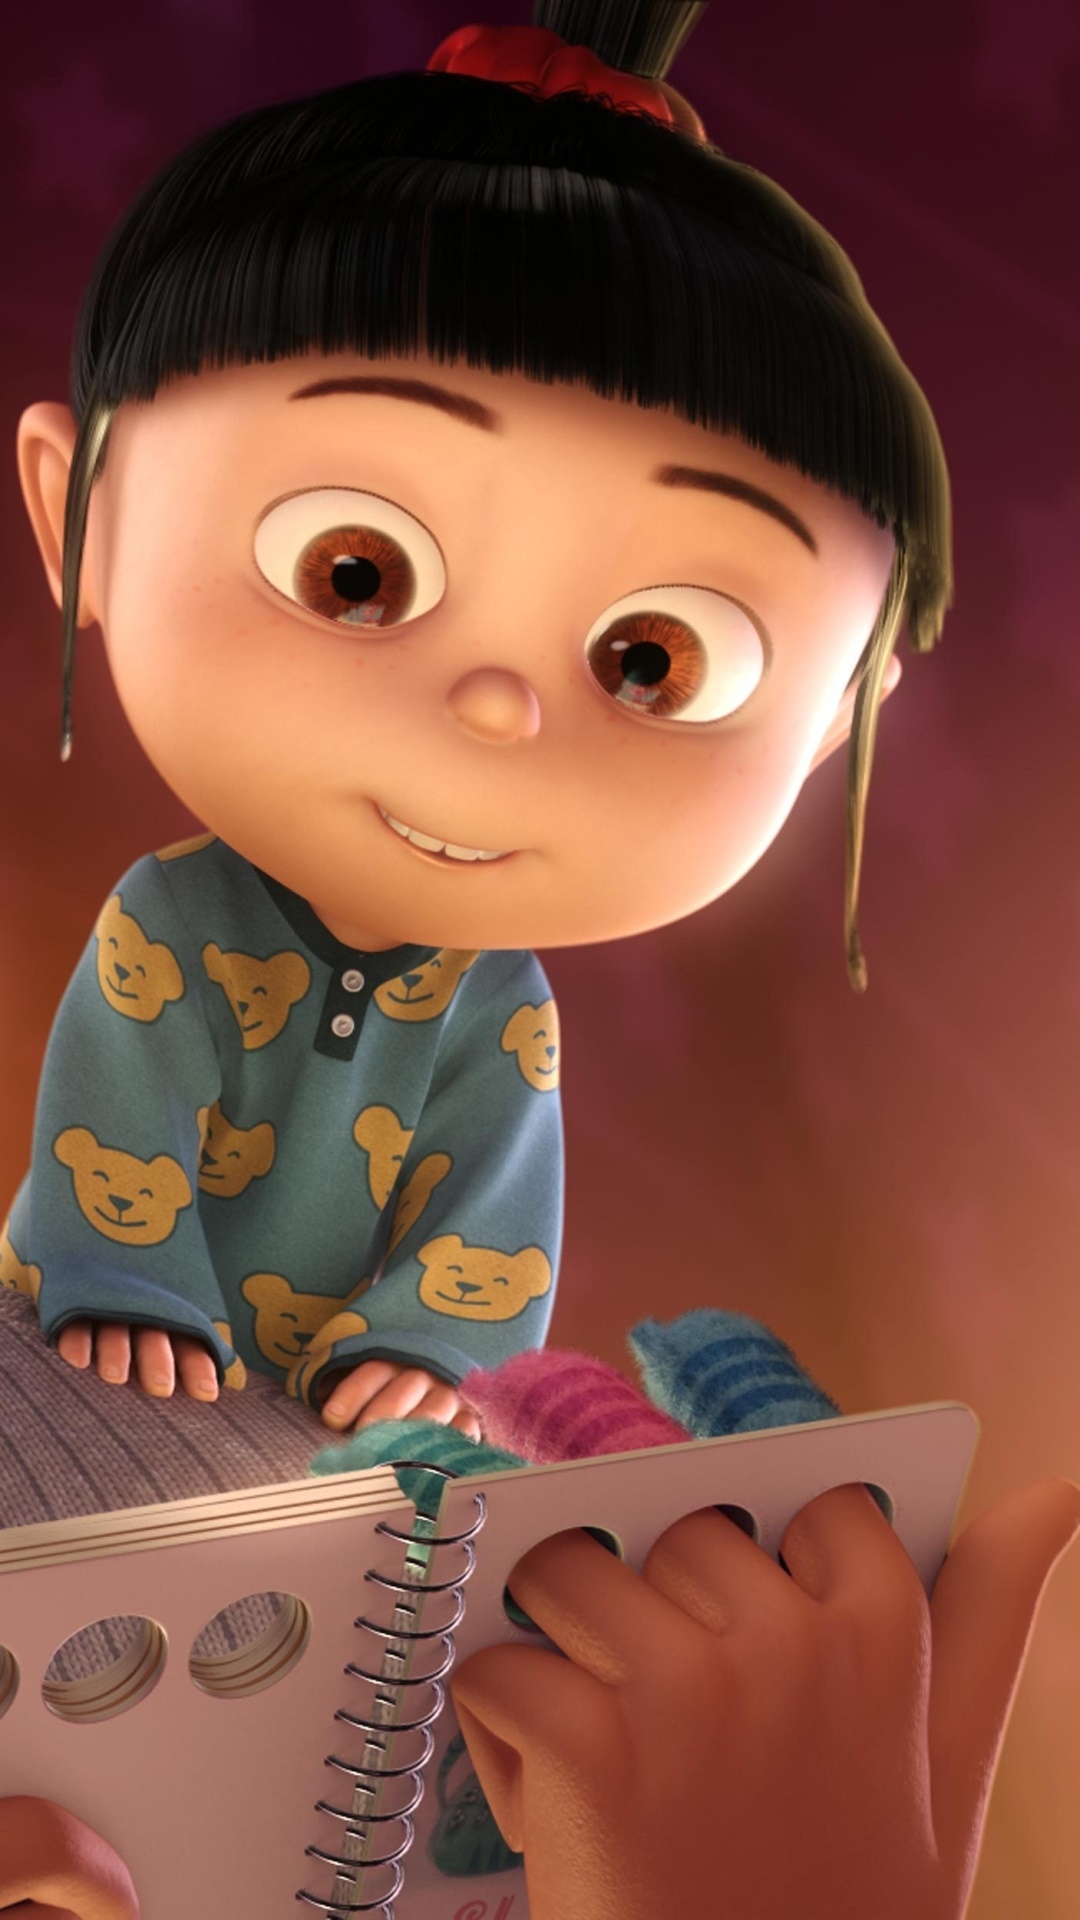 Despicable Me phone wallpaper 1080P, 2k, 4k Full HD Wallpaper, Background Free Download